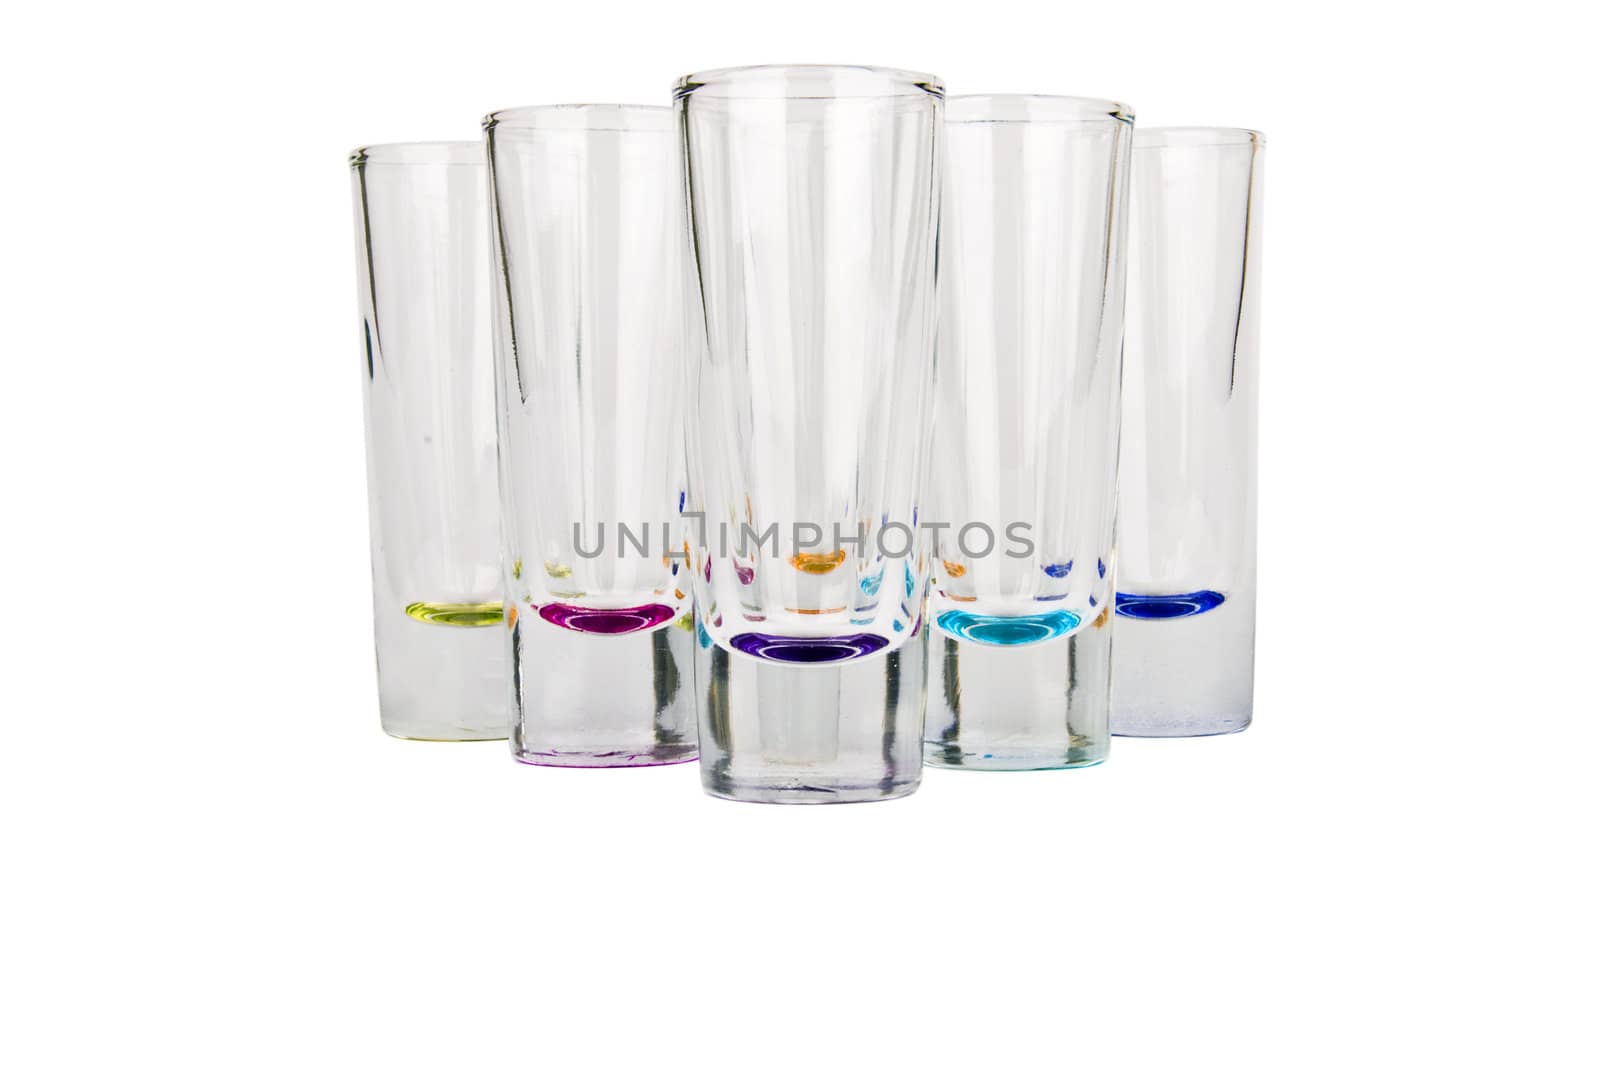 A collection of shot's in different colors on white background